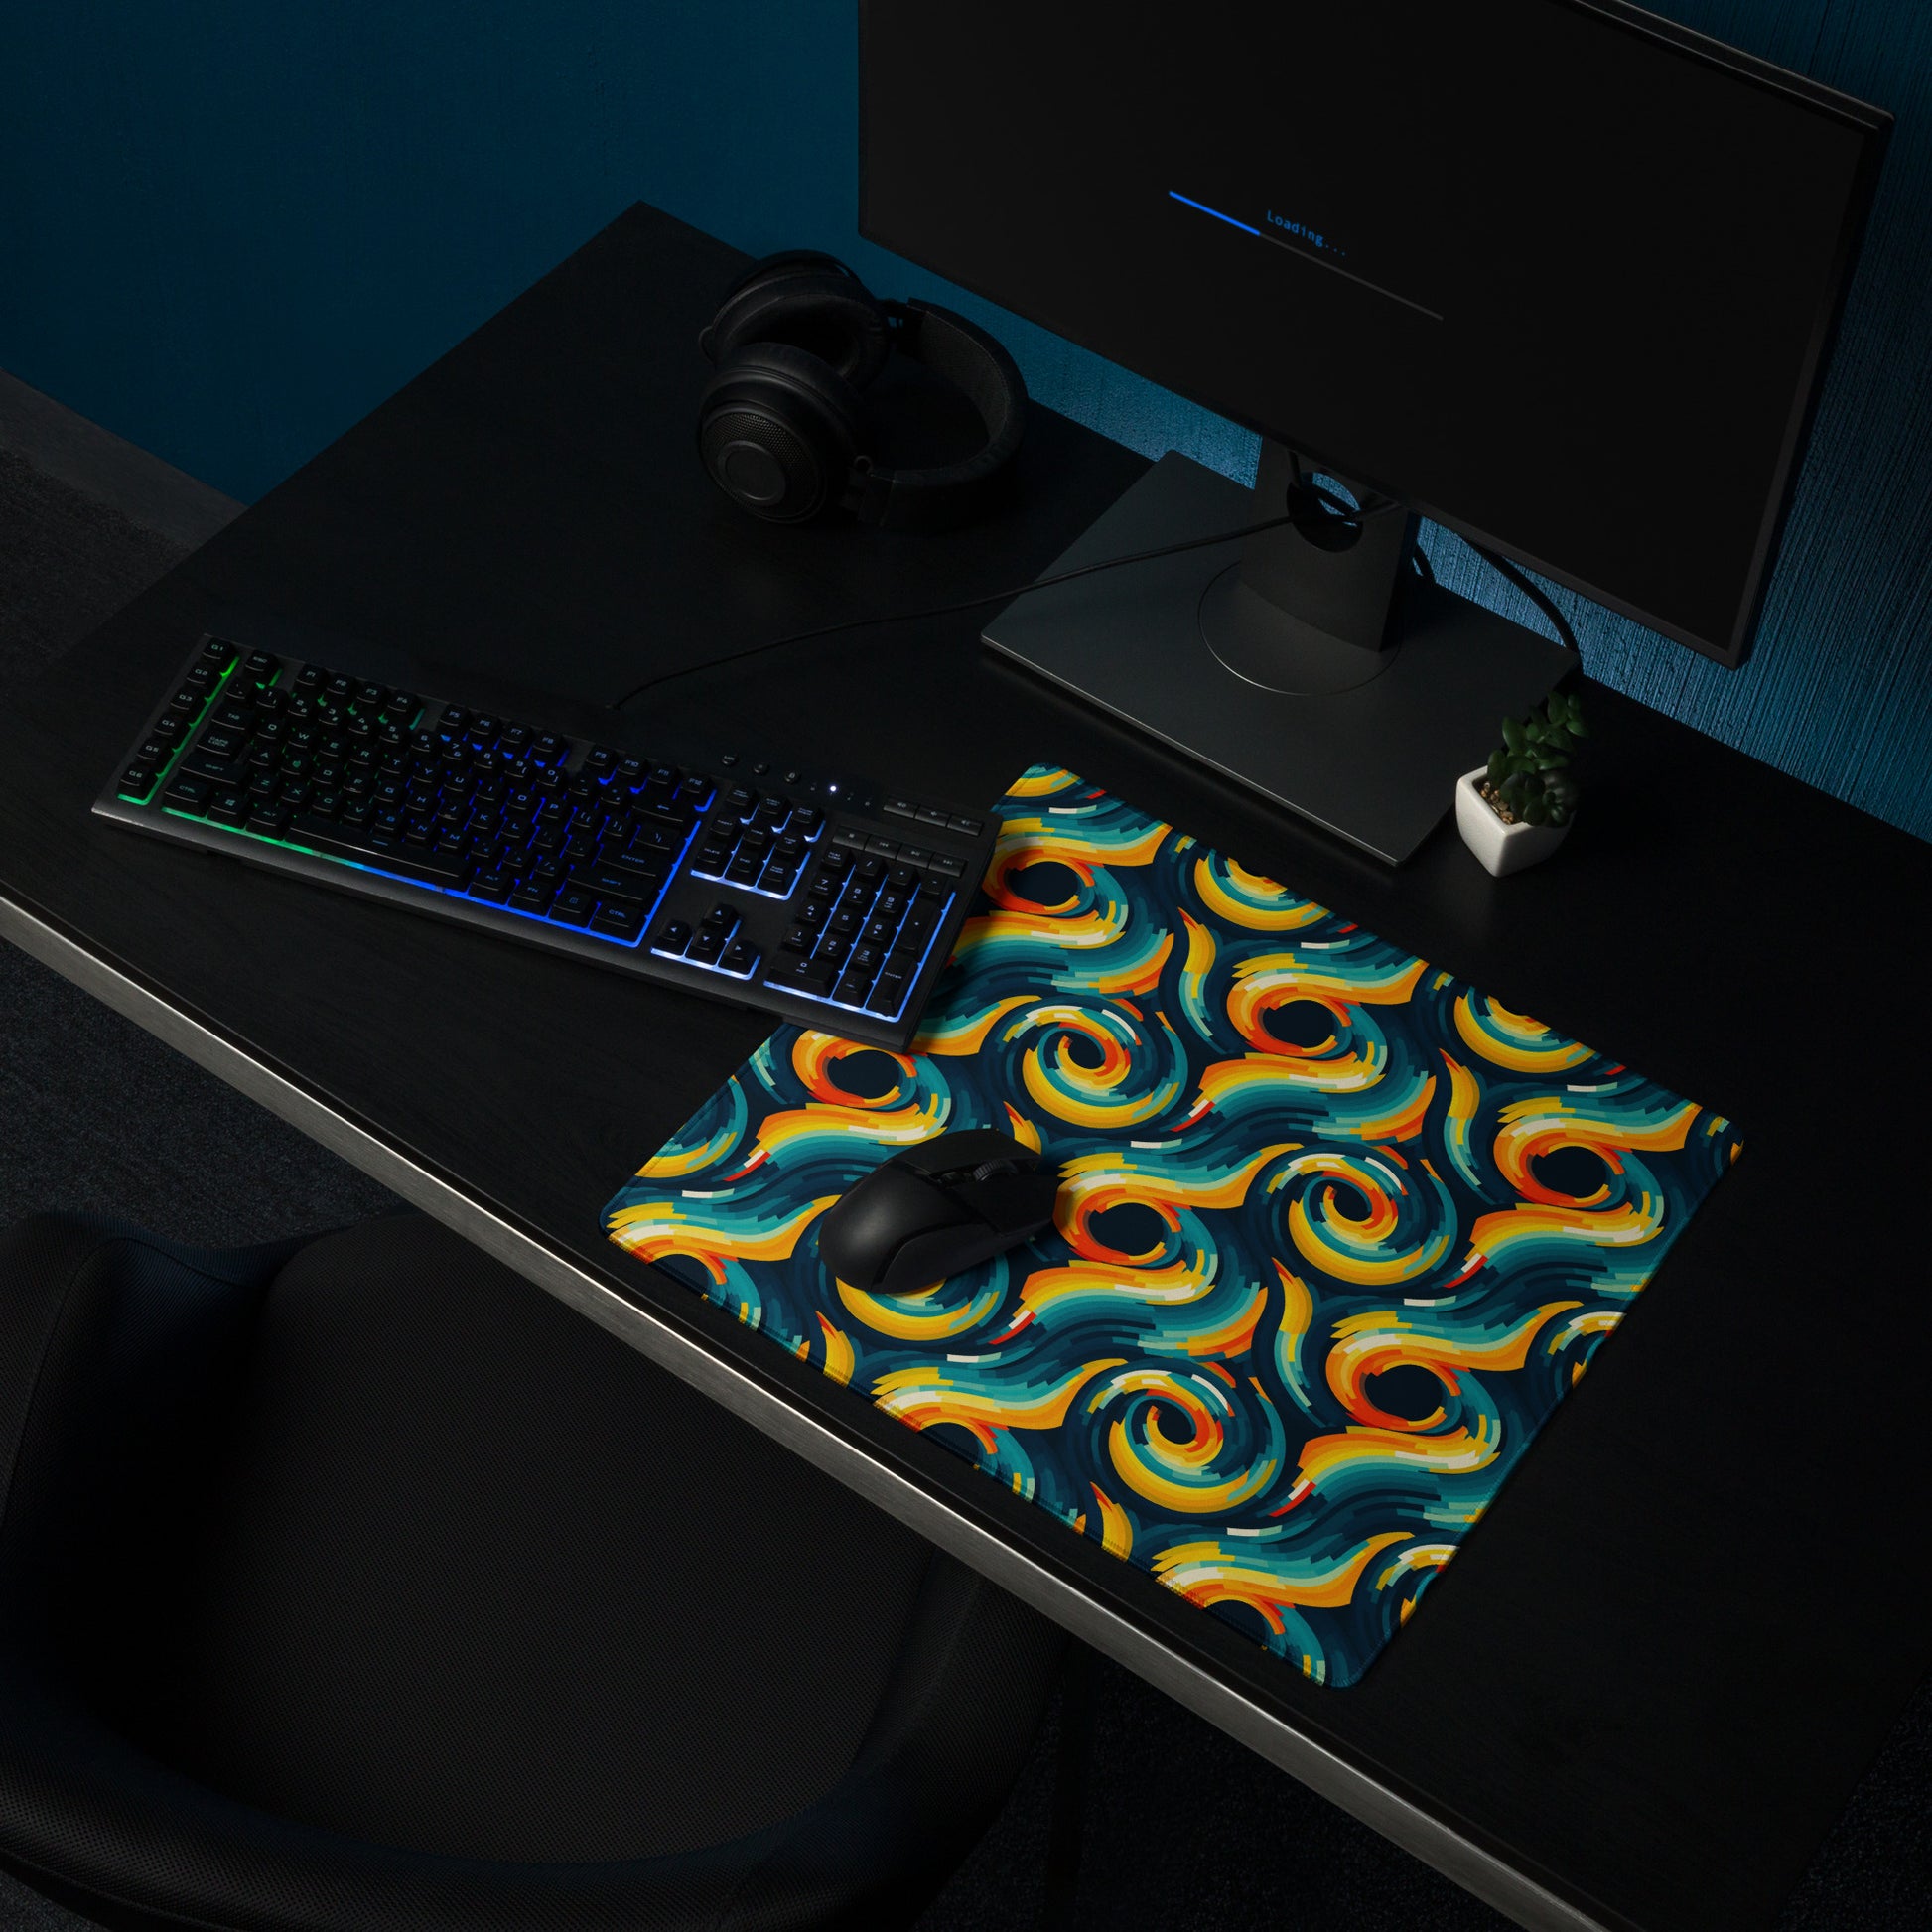 A 18" x 16" desk pad with swirls all over it shown on a desk setup. Yellow and Blue in color.